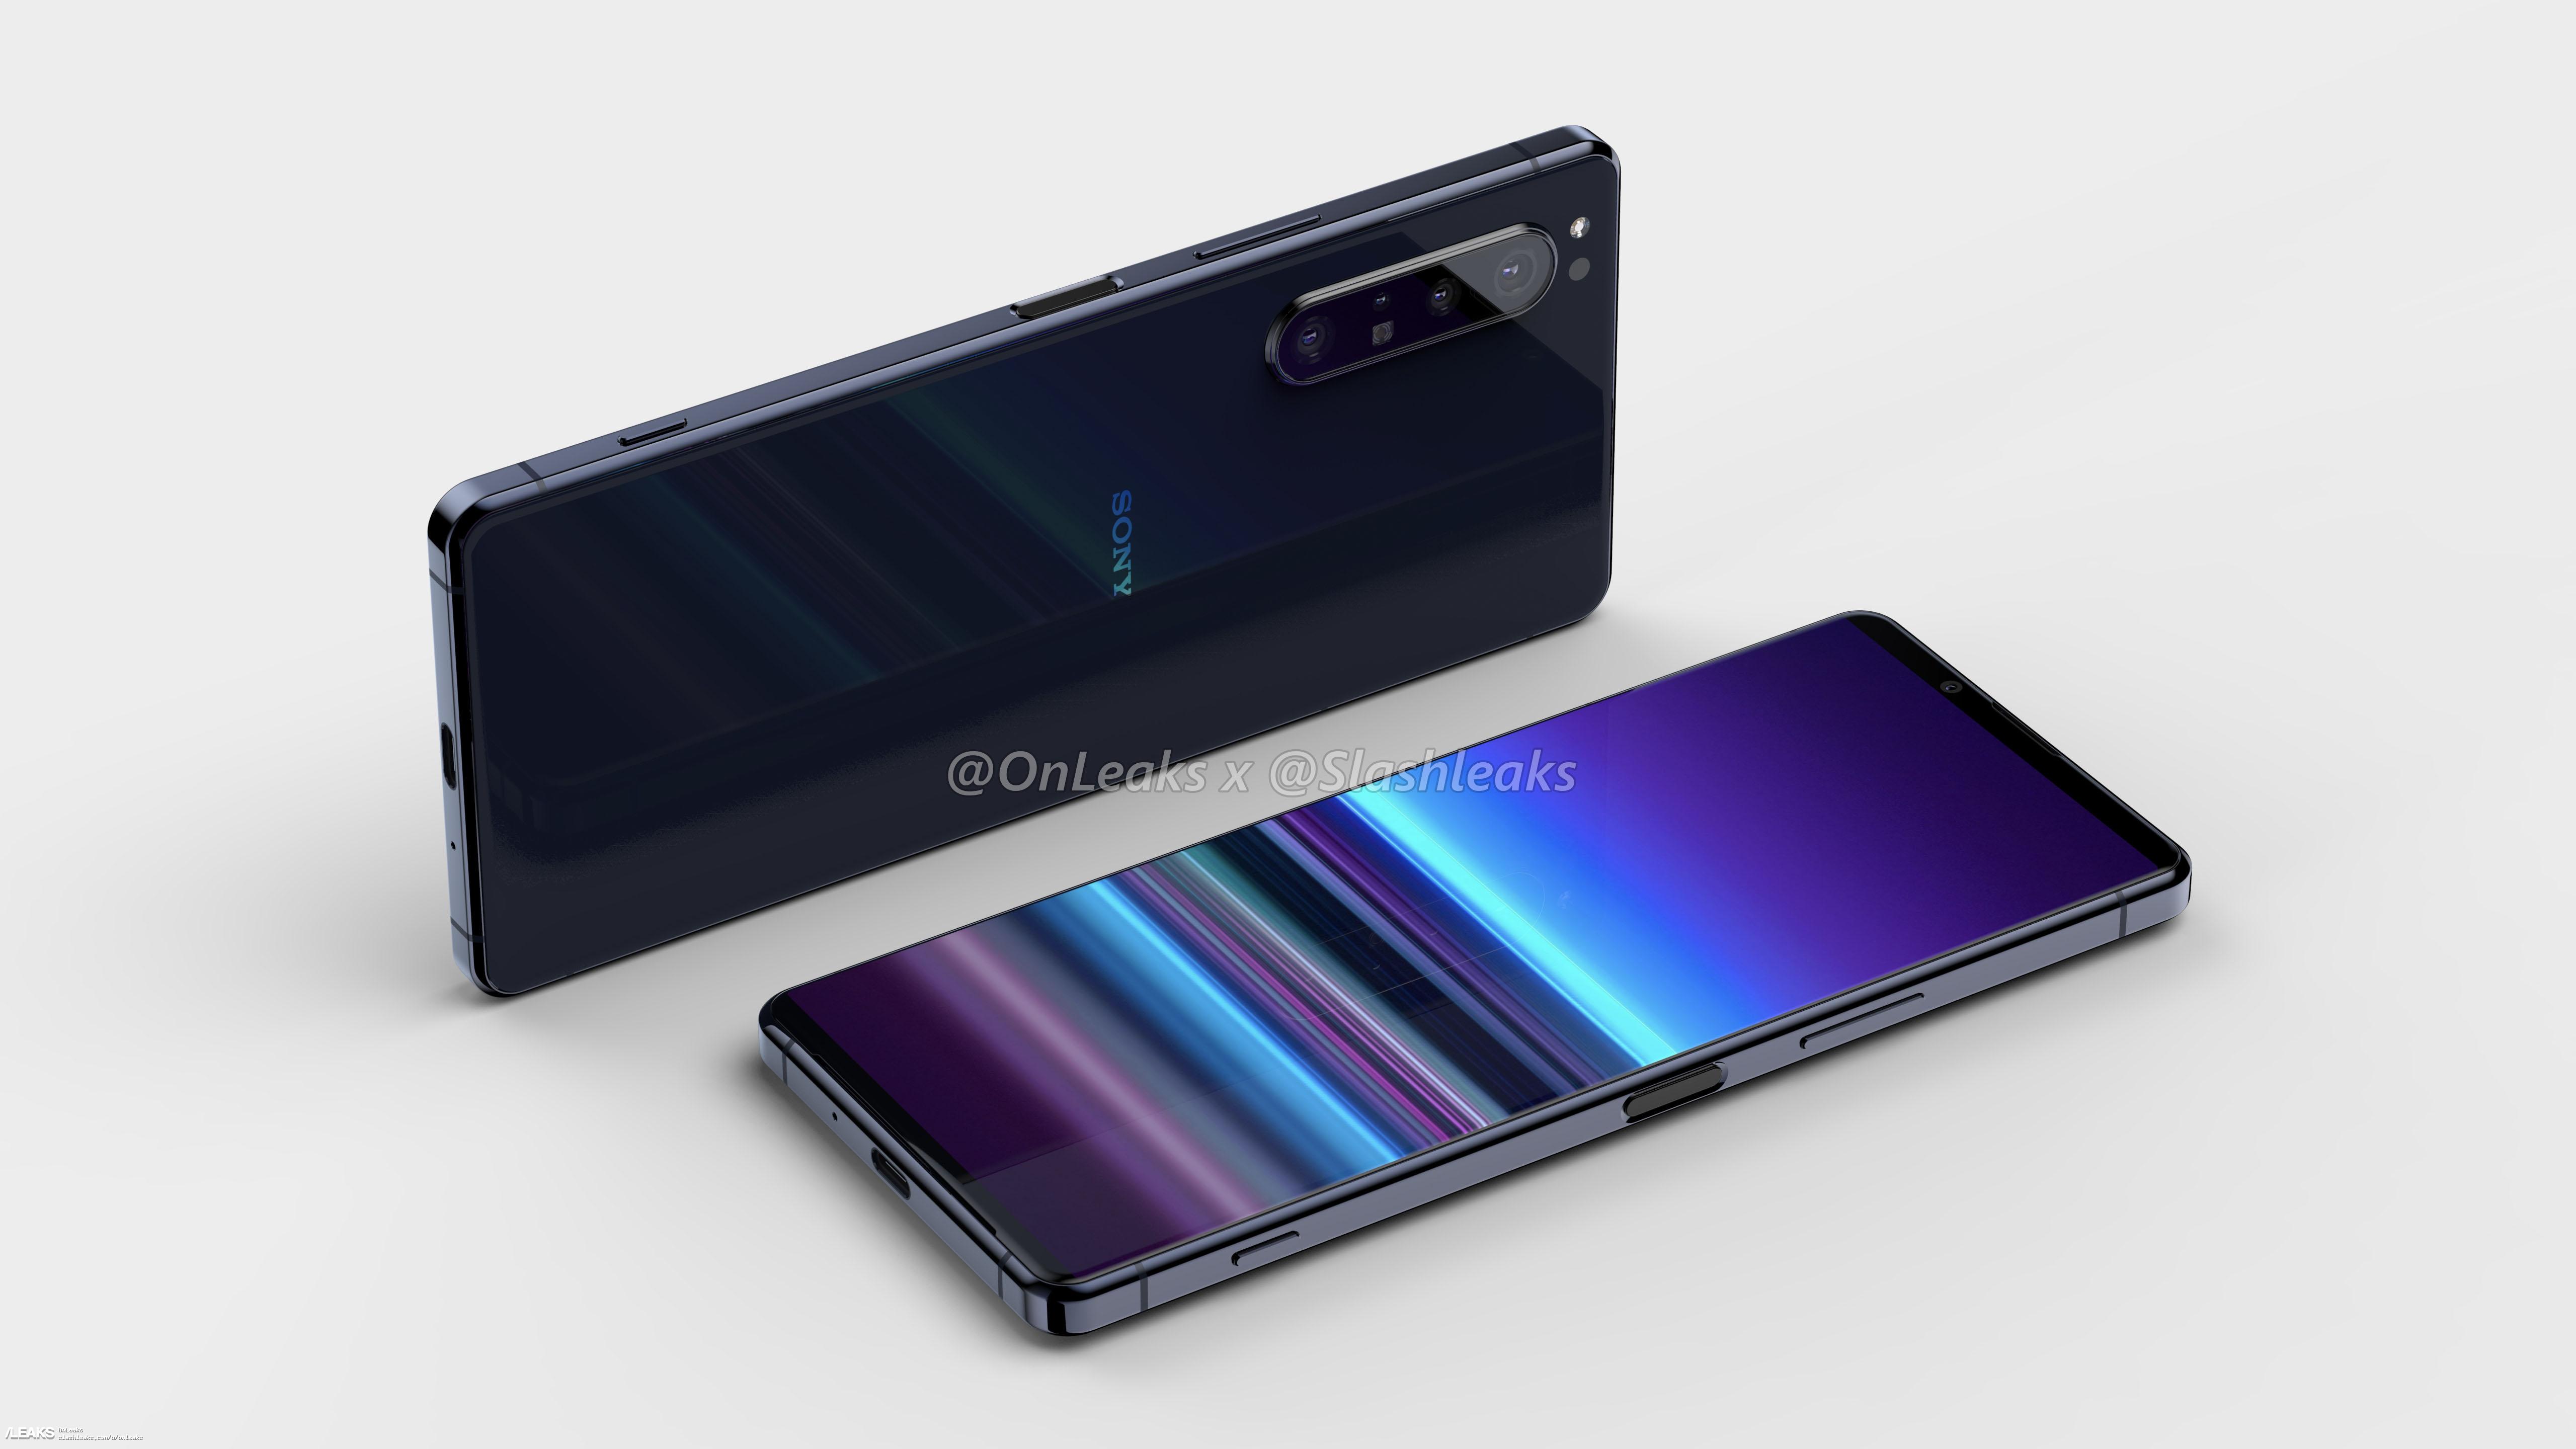 Top Leaker Outs The Xperia 5 Plus Sony S Next Flagship Smartphone